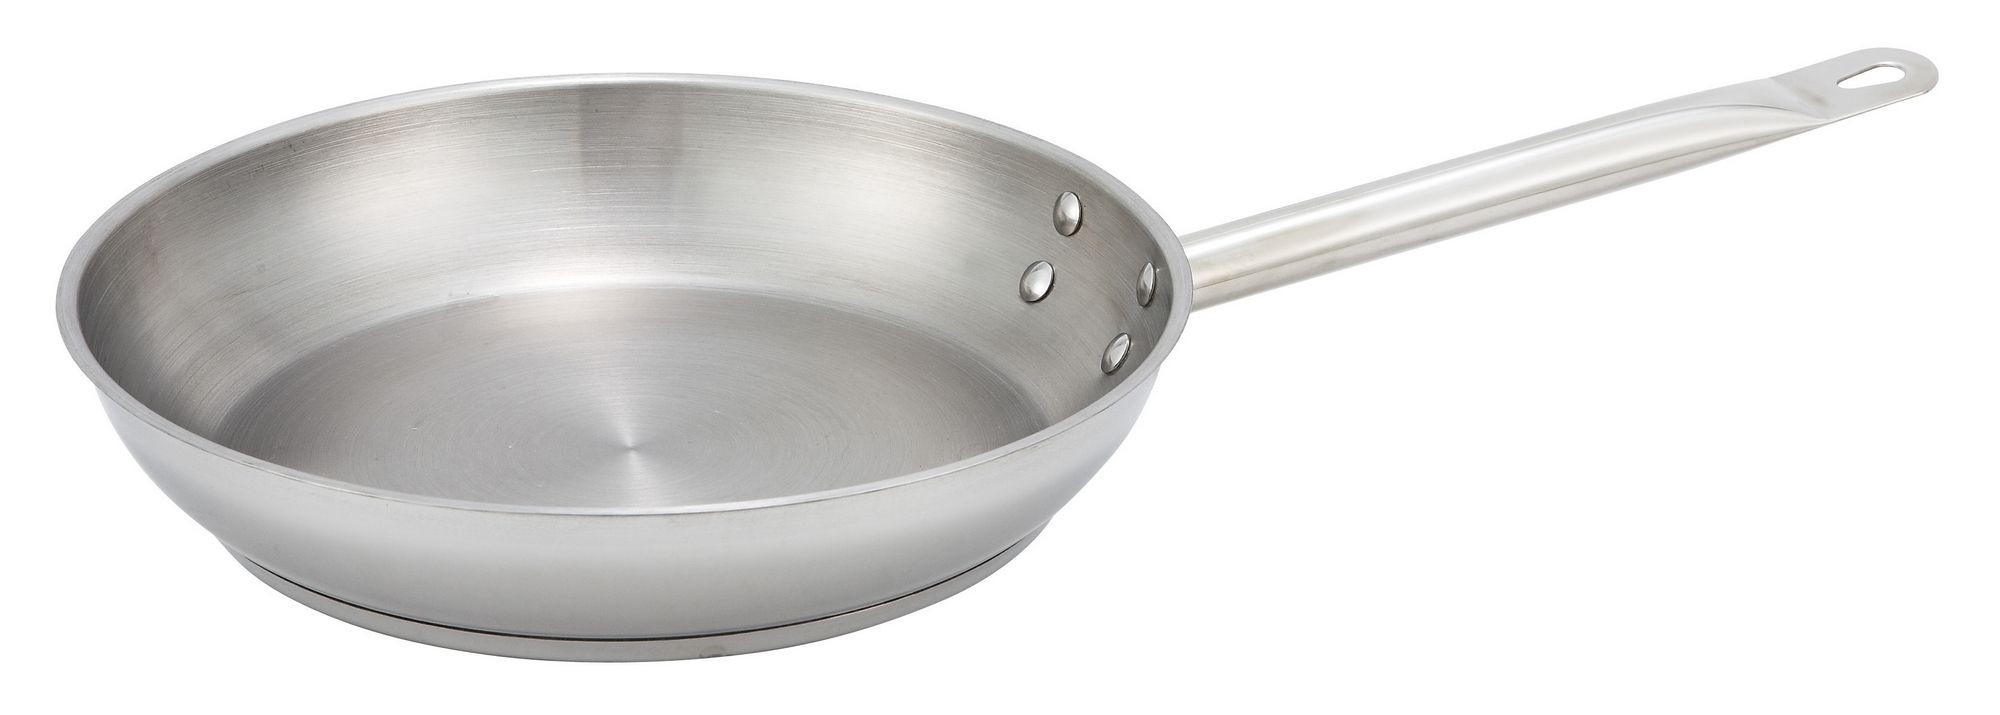 Winco SSFP-9 Stainless Steel Induction Fry Pan 9"